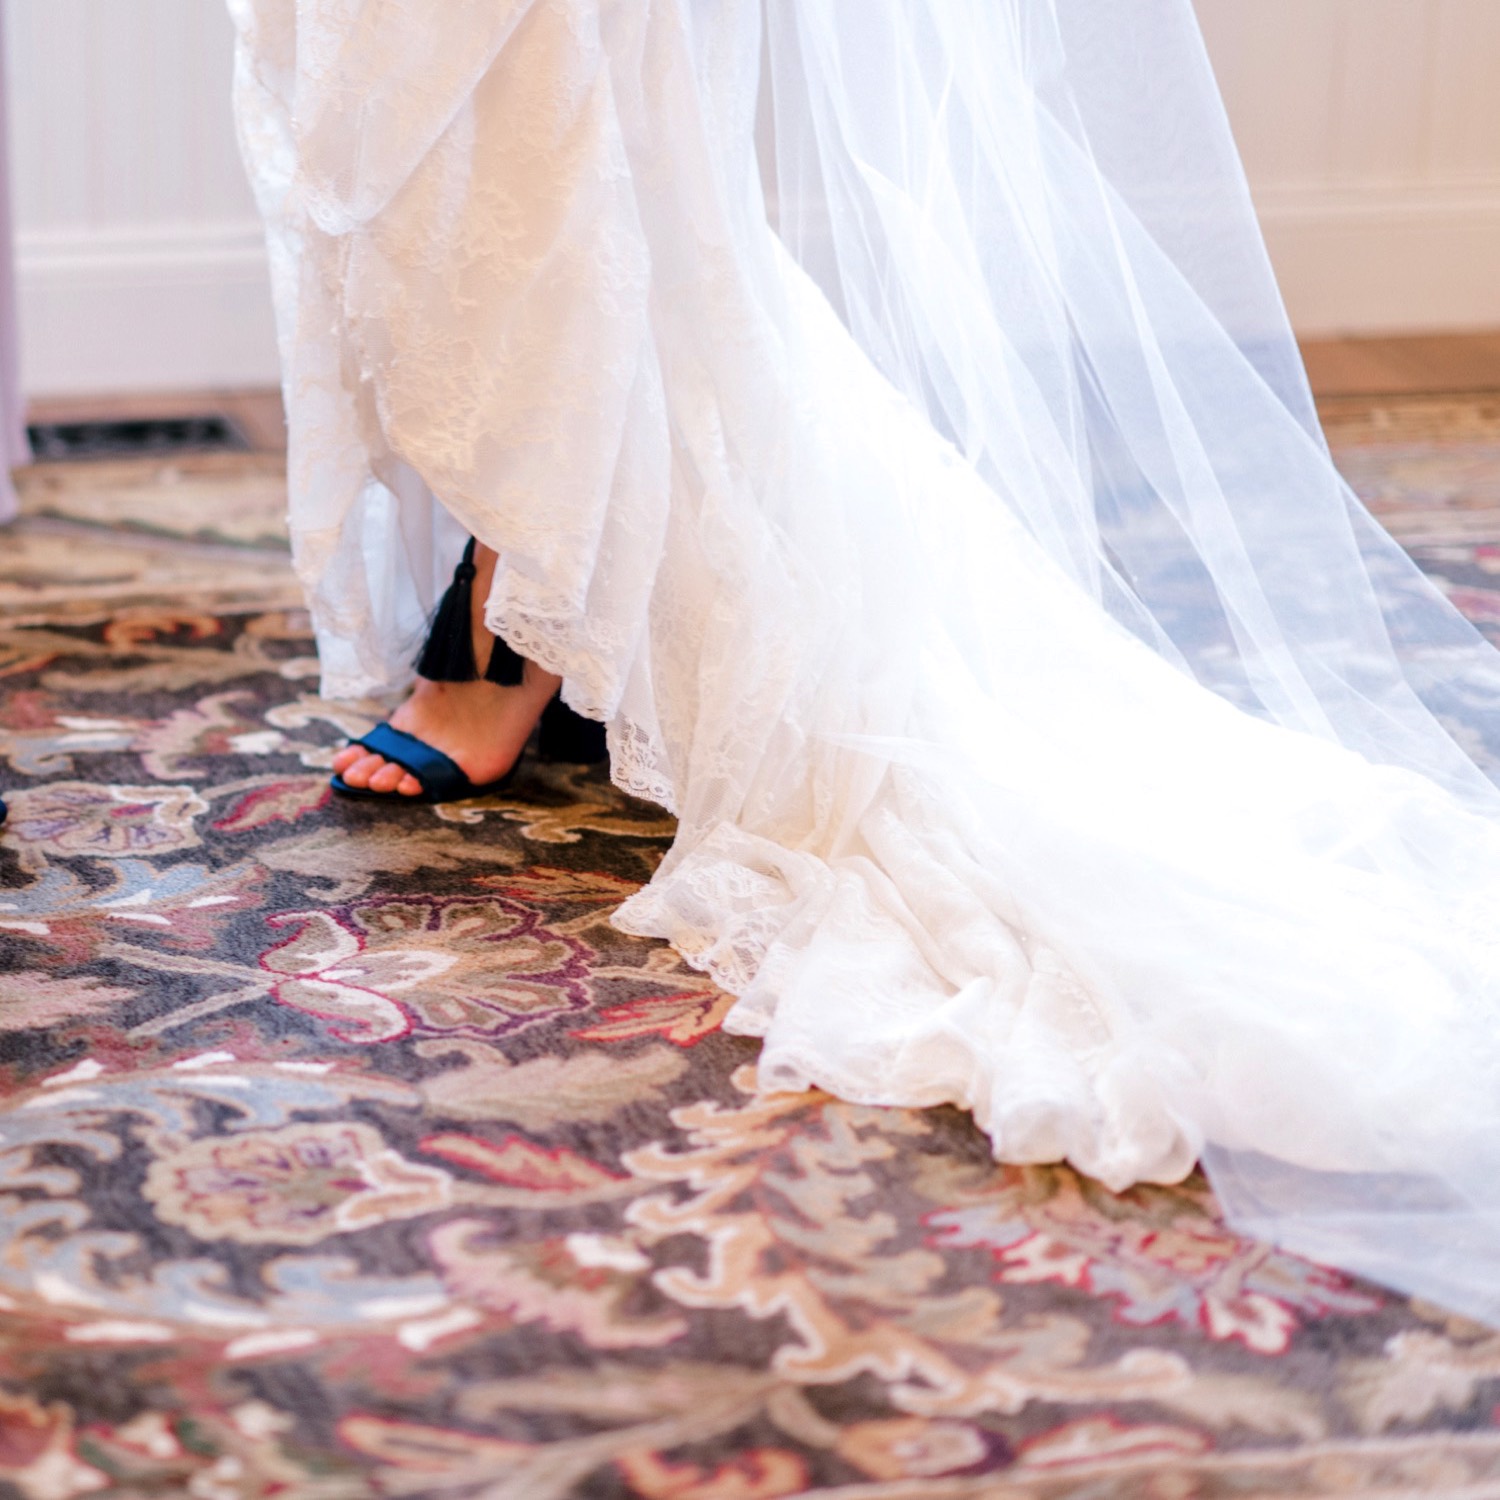 Kristen, the bride, wore bright blue heels for her wedding at Spruce Mountain Ranch in Larkspur, Colorado. 